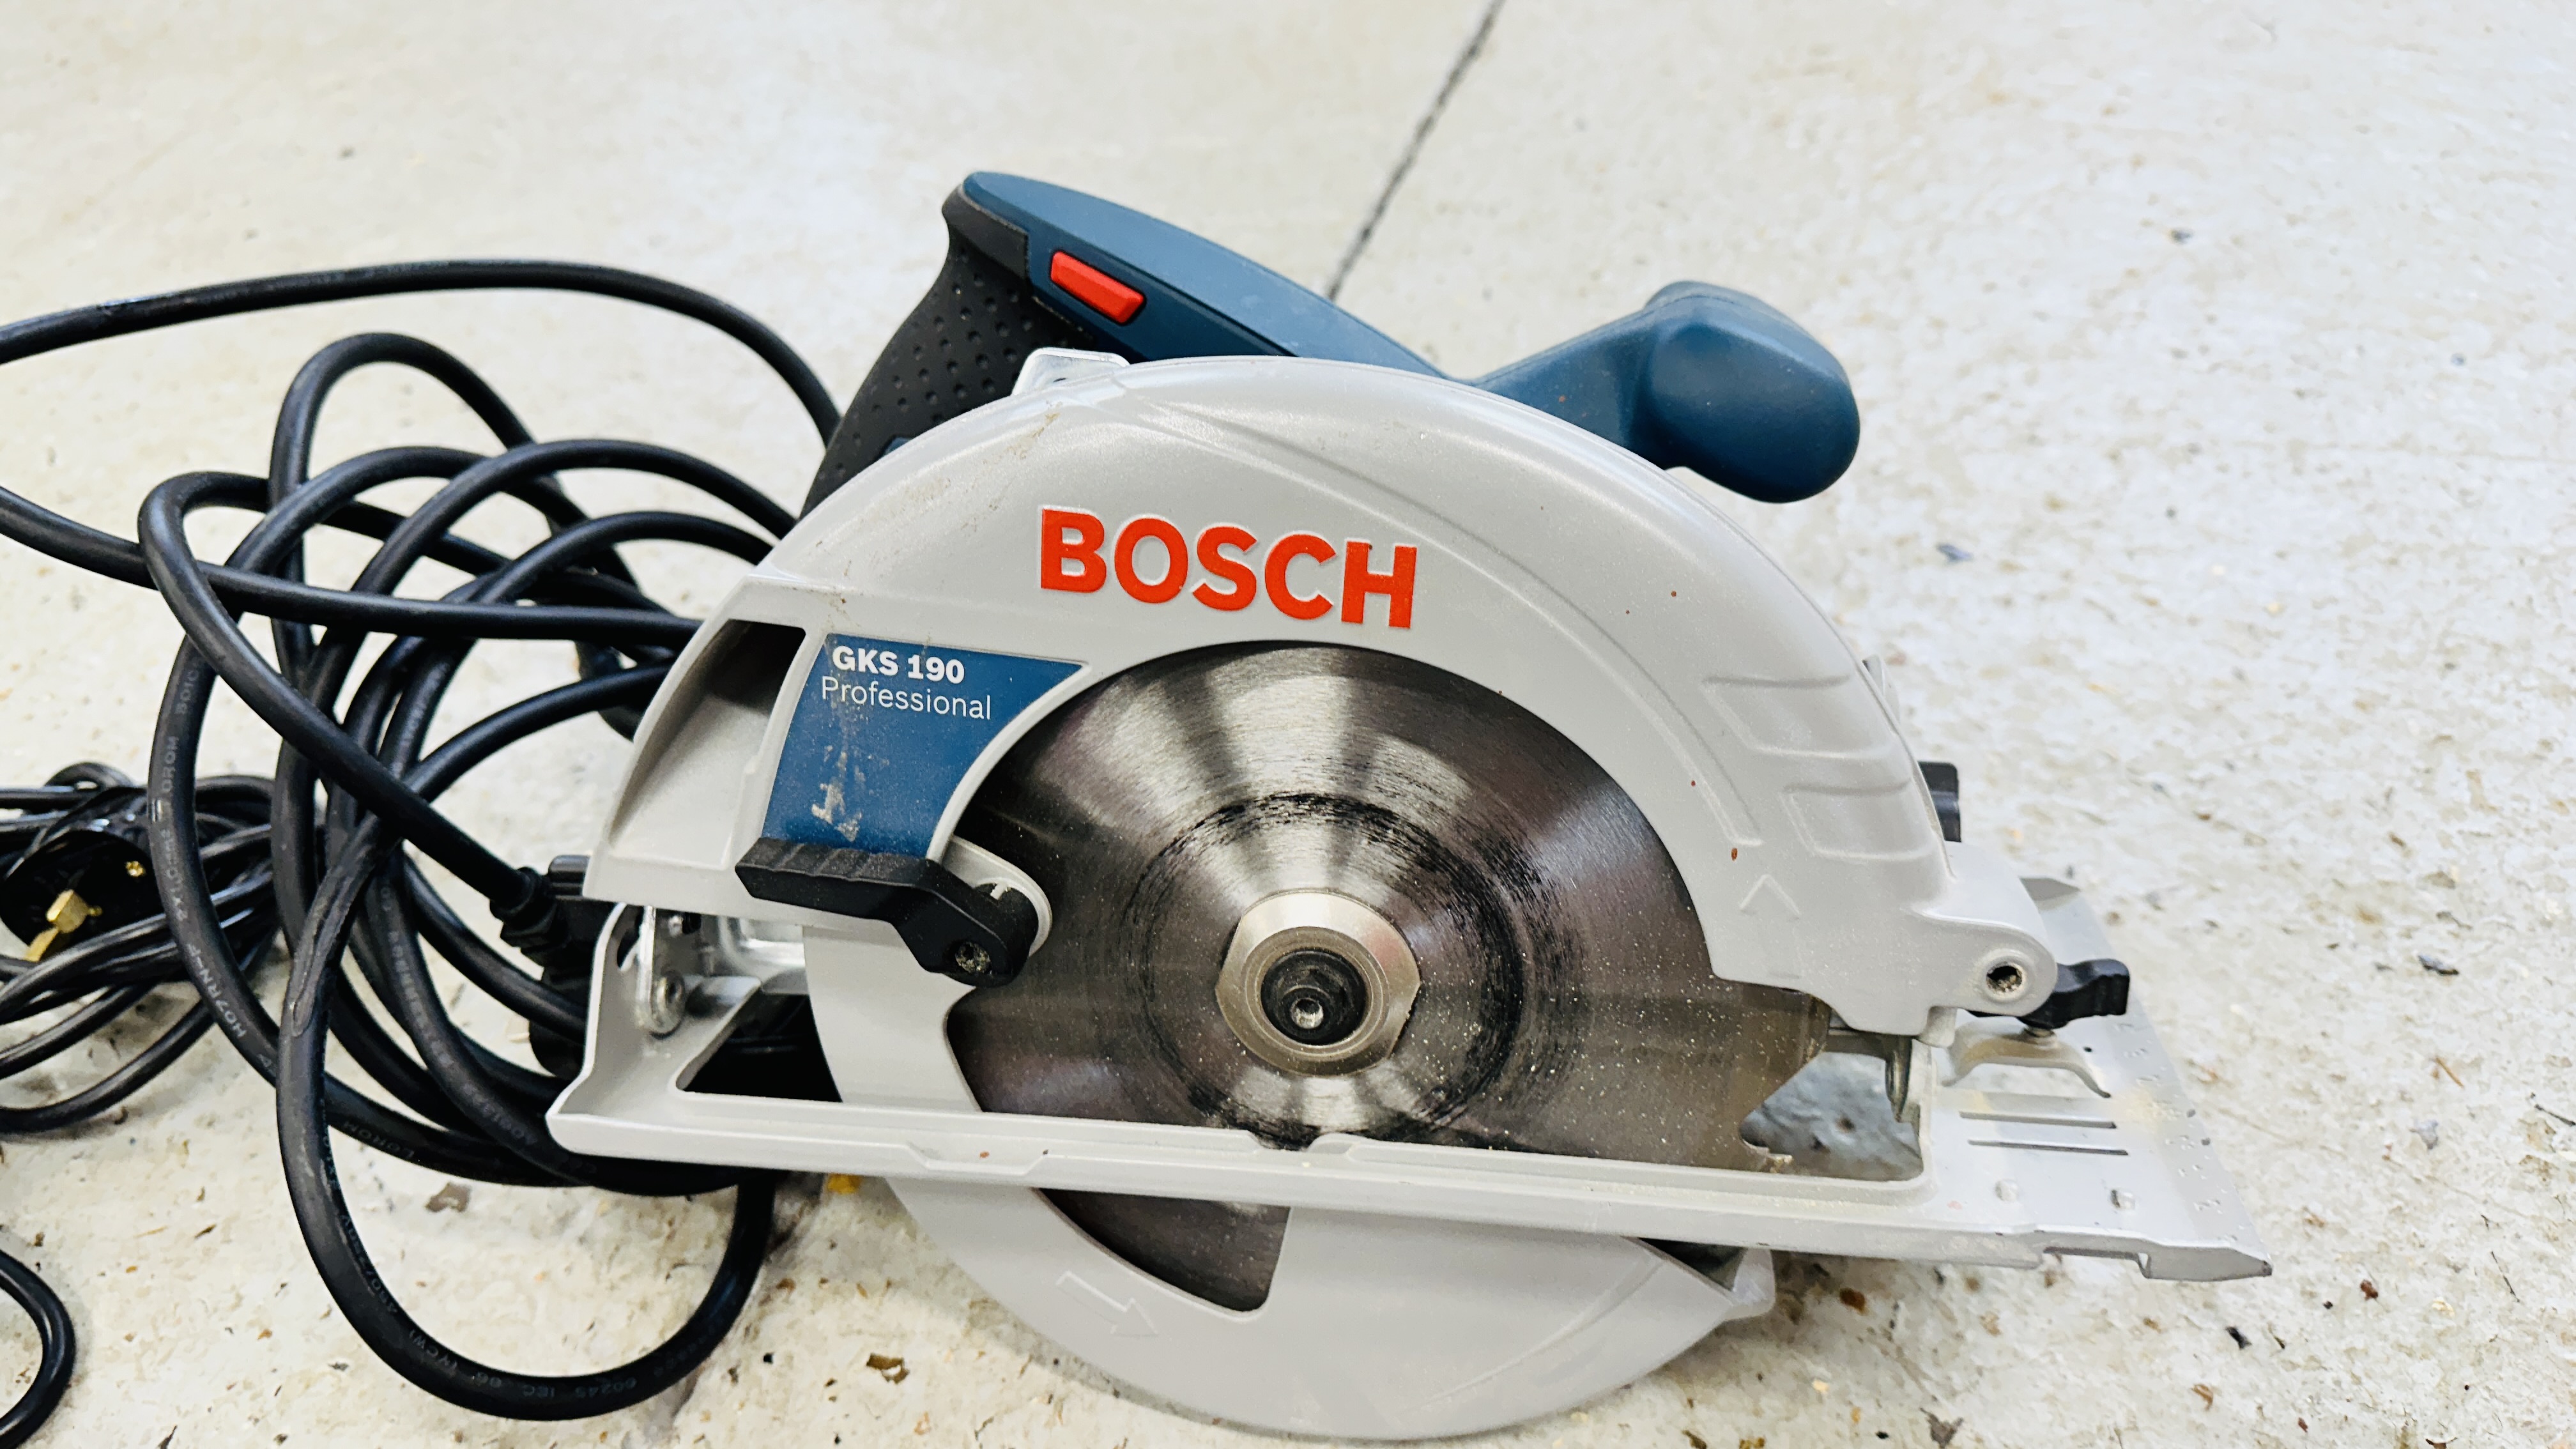 BOSCH GKS 190 CIRCULAR SAW ALONG WITH EINHELL 4 INCH GRINDER AND MACALLISTER MSCS110 SANDER - SOLD - Image 2 of 5